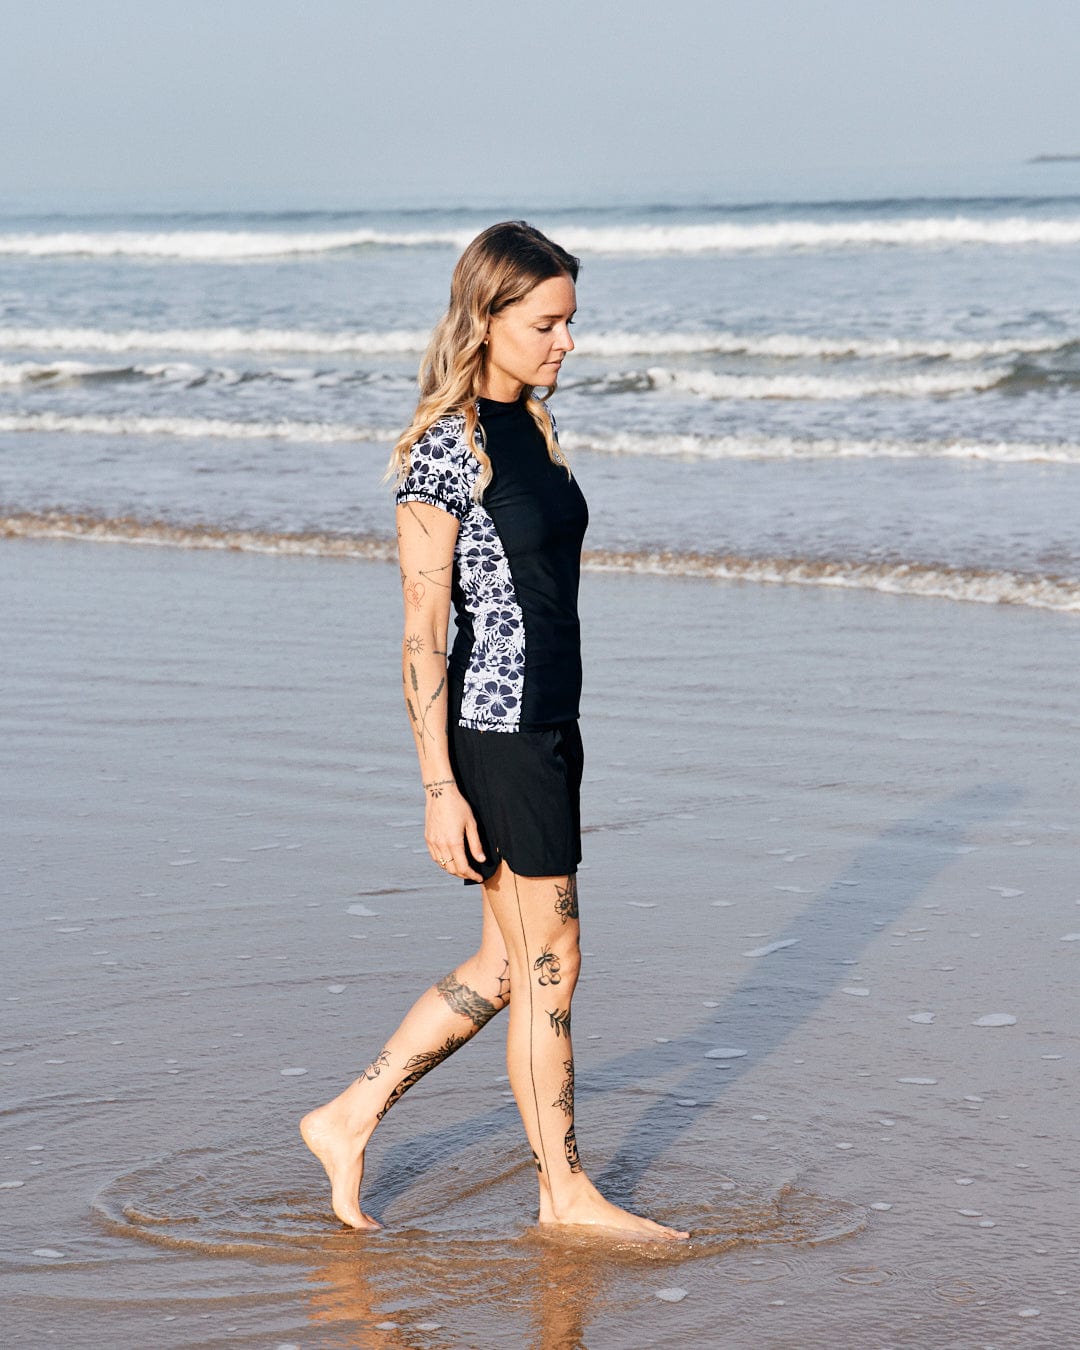 A woman with tattoos walks barefoot on a sandy beach, wearing a black and white Saltrock Hibiscus - Recycled Womens Short Sleeve Rashvest - Black shirt and shorts, with ocean waves in the background.